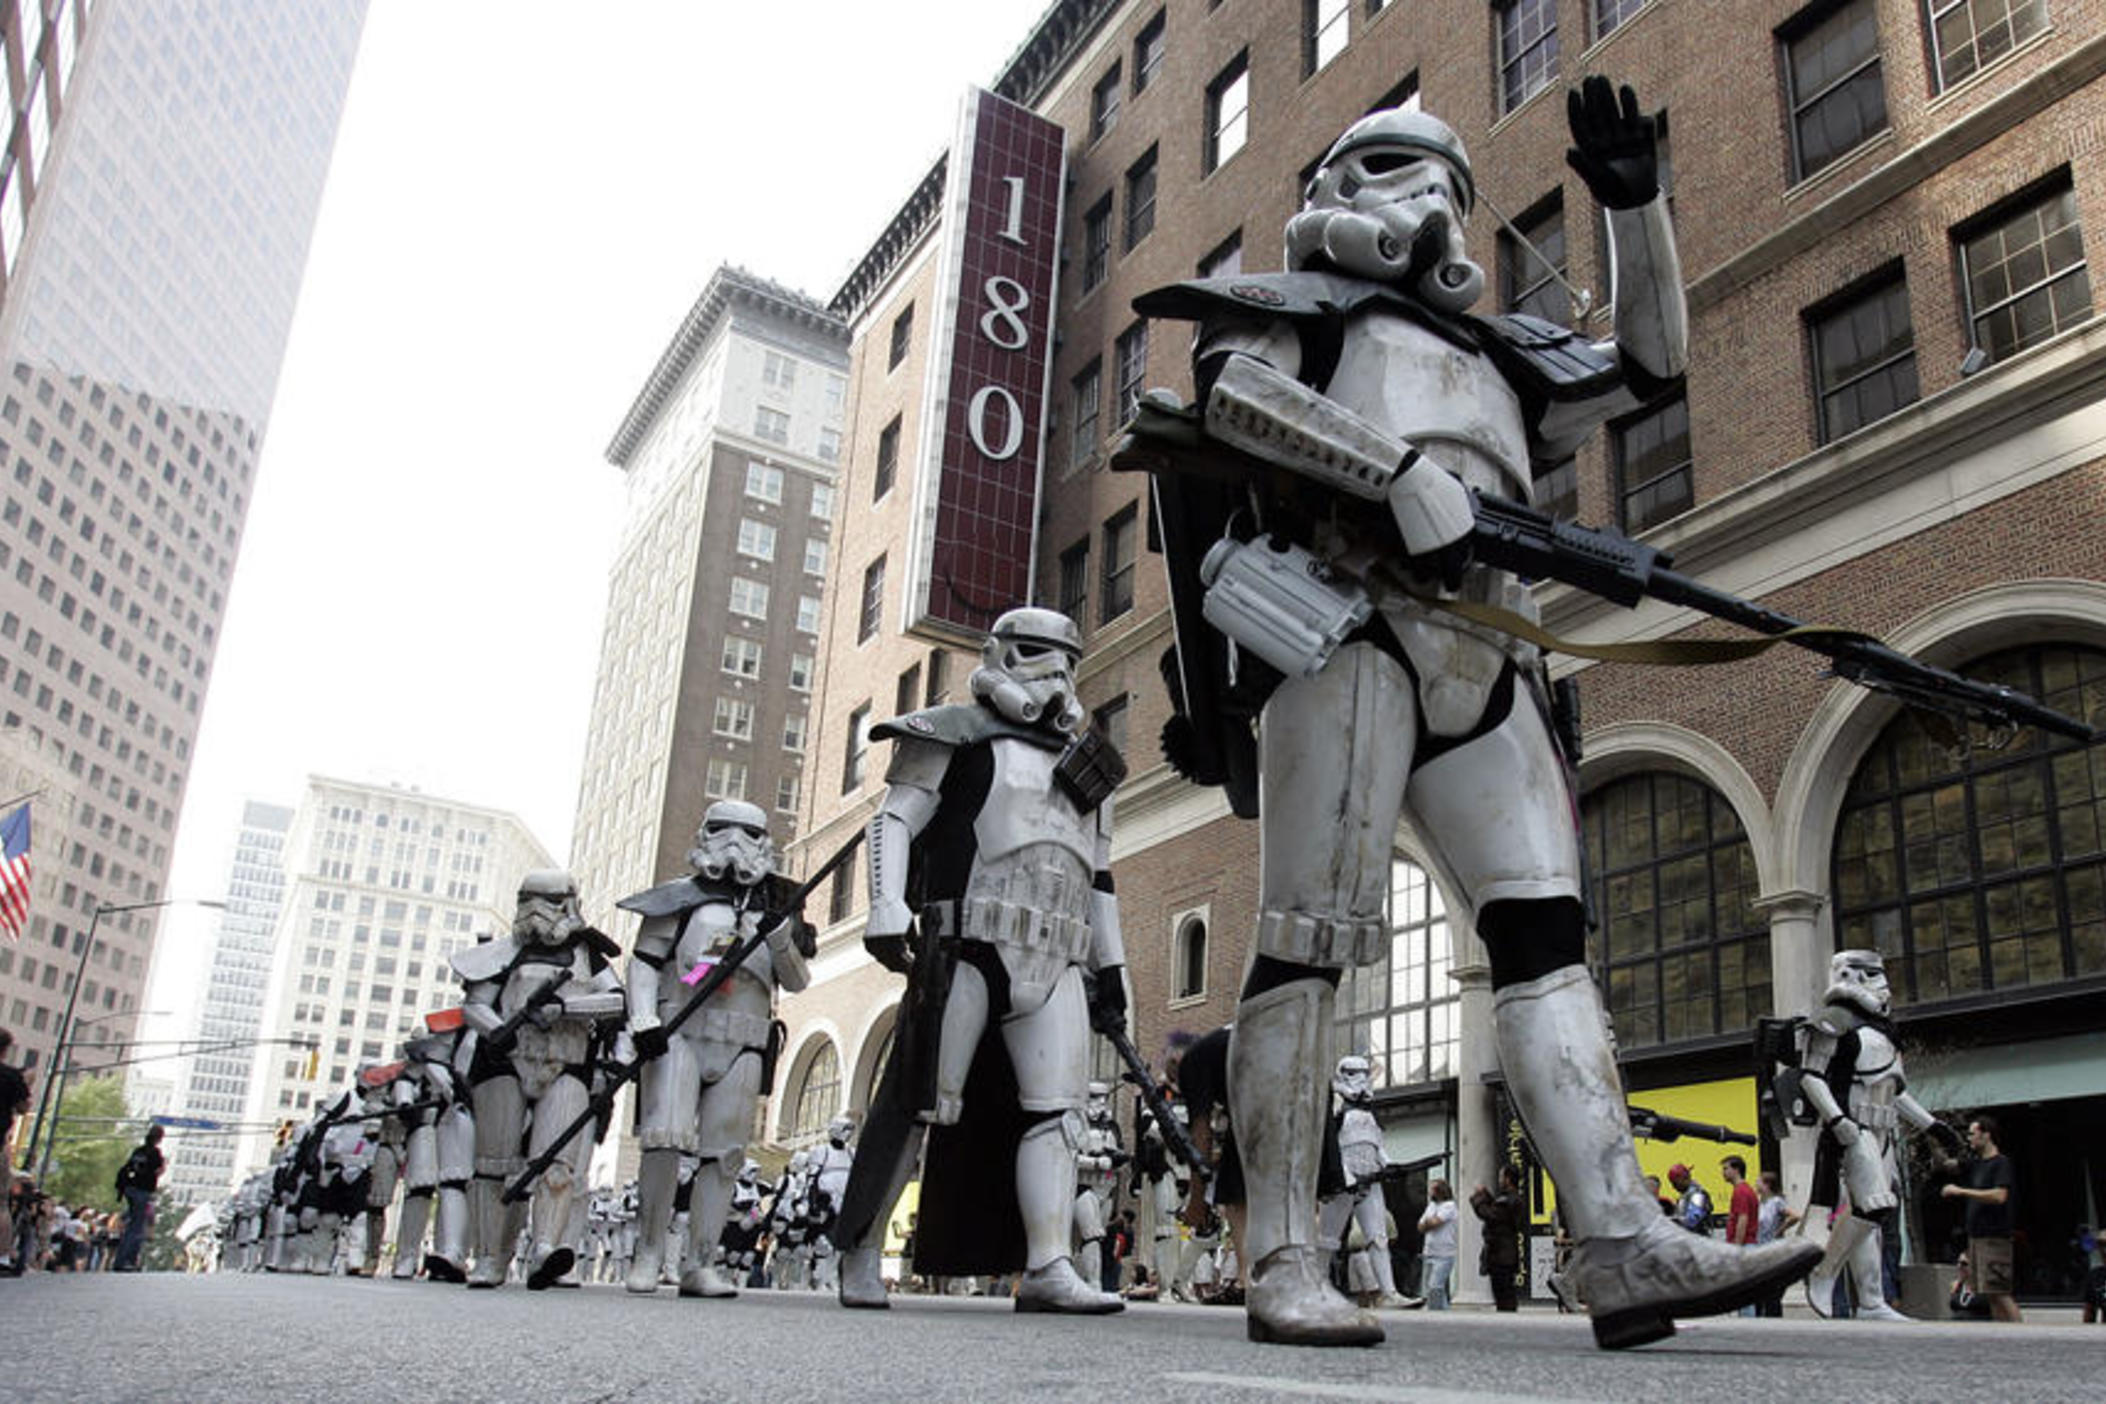 Participants dressed up as stormtrooper characters from the Star Wars movies make their way down Peachtree Street during the sixth annual Dragon Con parade Saturday, Sept. 1, 2007.